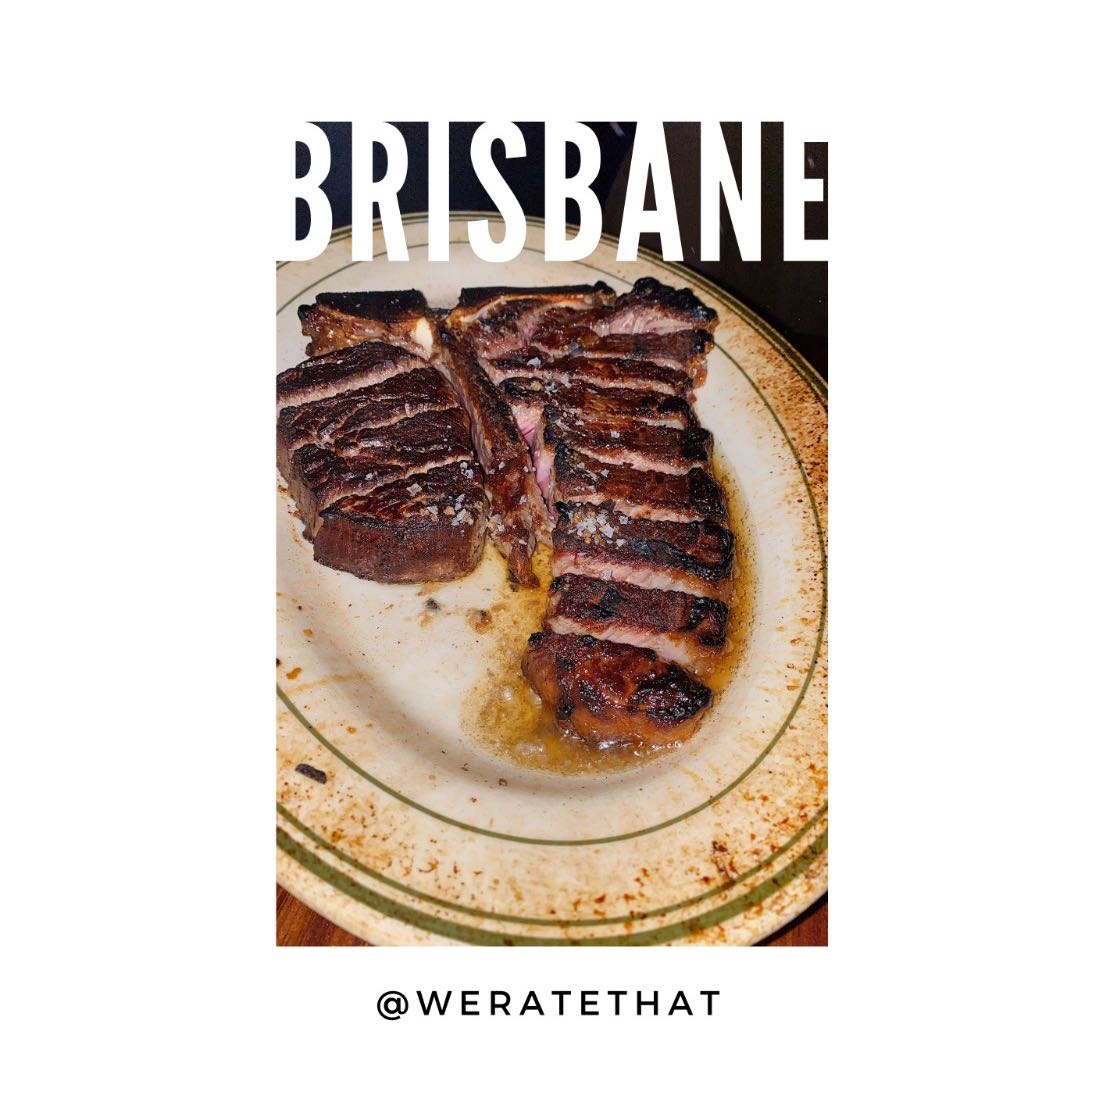 A foodies guide to Brisbane